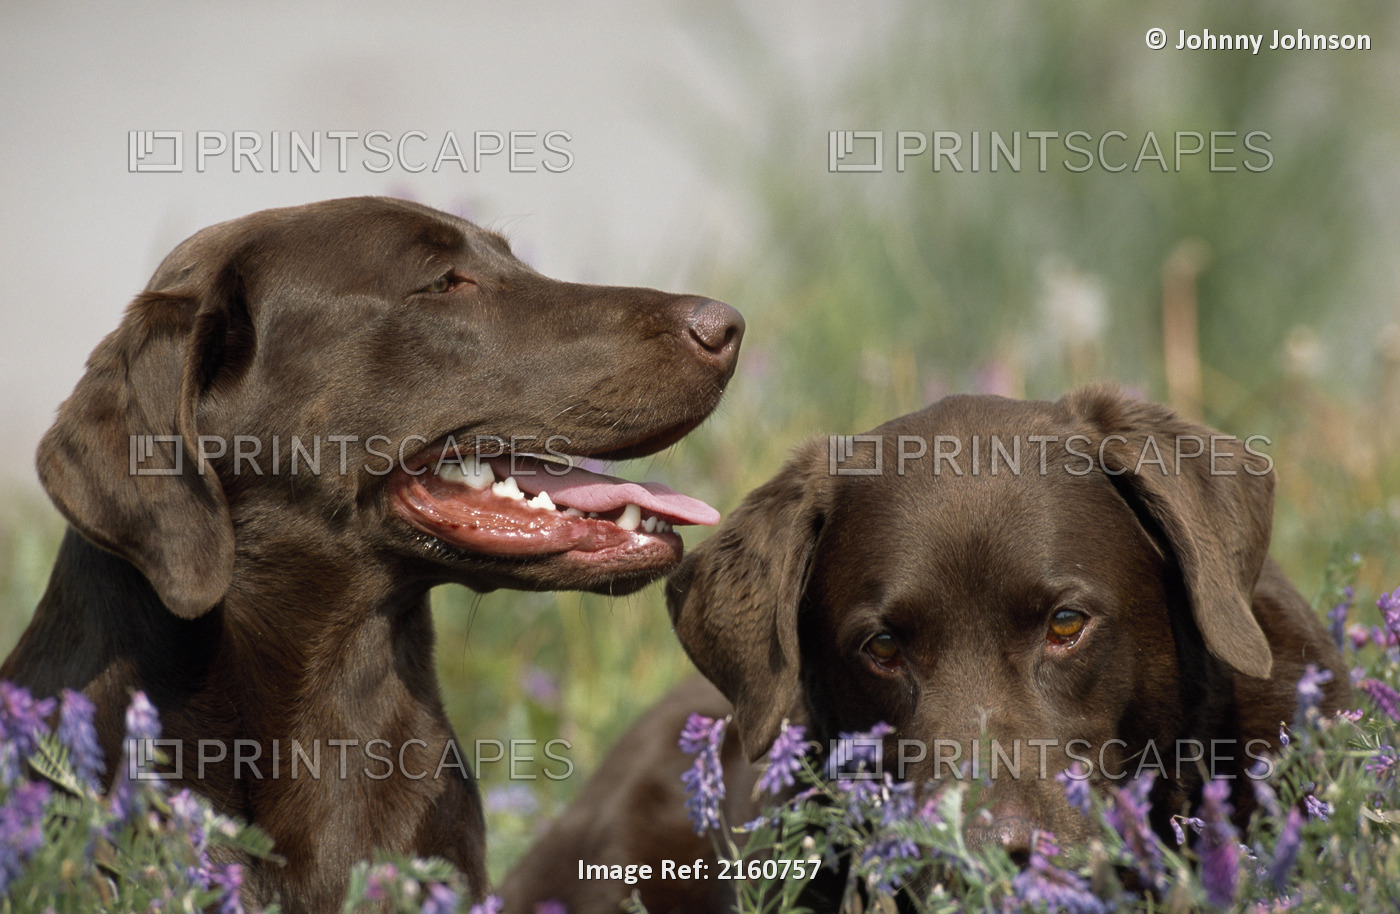 Chocolate Labrador Retriever Dogs Laying In A Field Of Hairy Vetch Flowers In ...